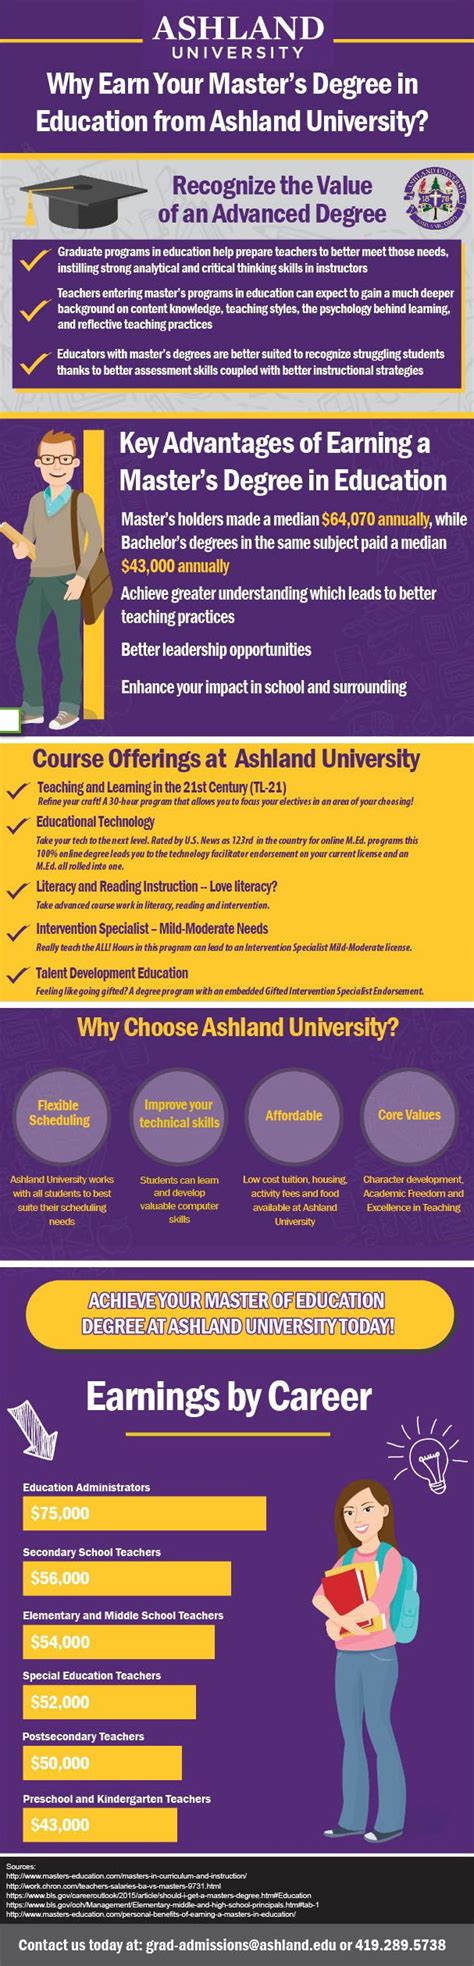 Why Earn Your Masters Degree In Education From Ashland